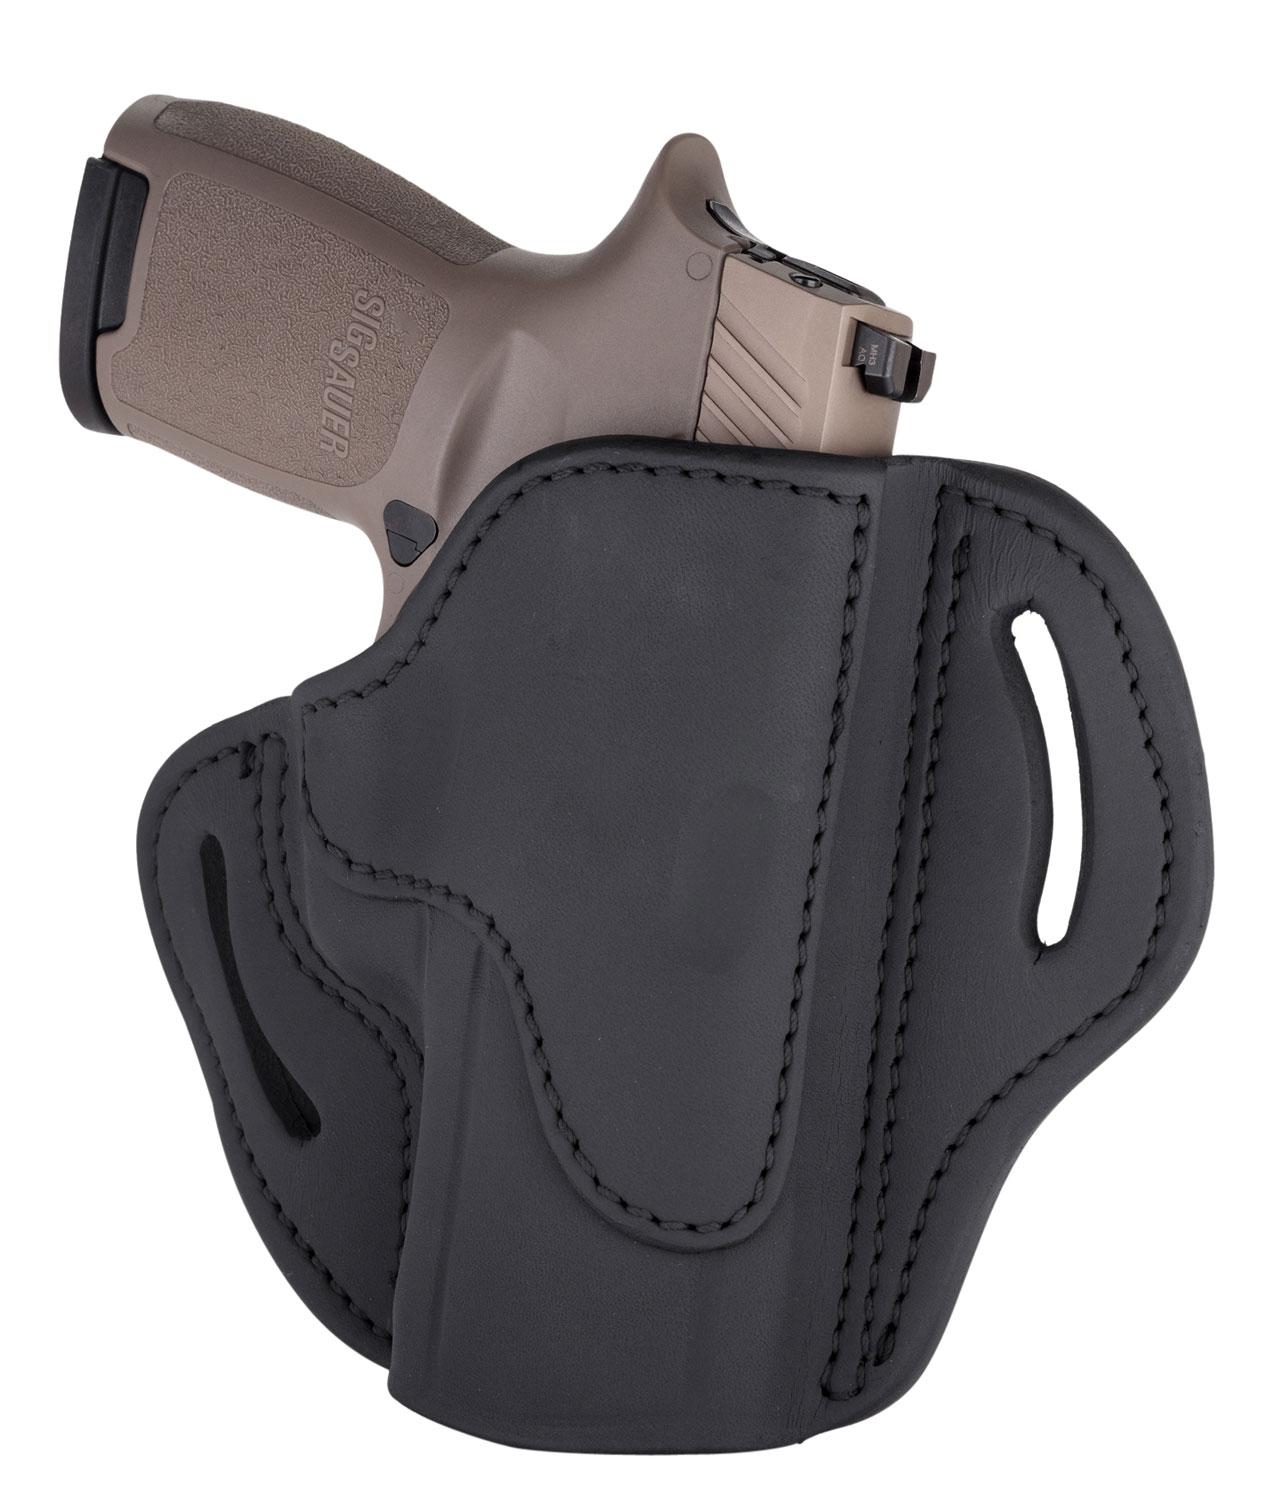  Bh2 4s Compact Holster Black Right Hand